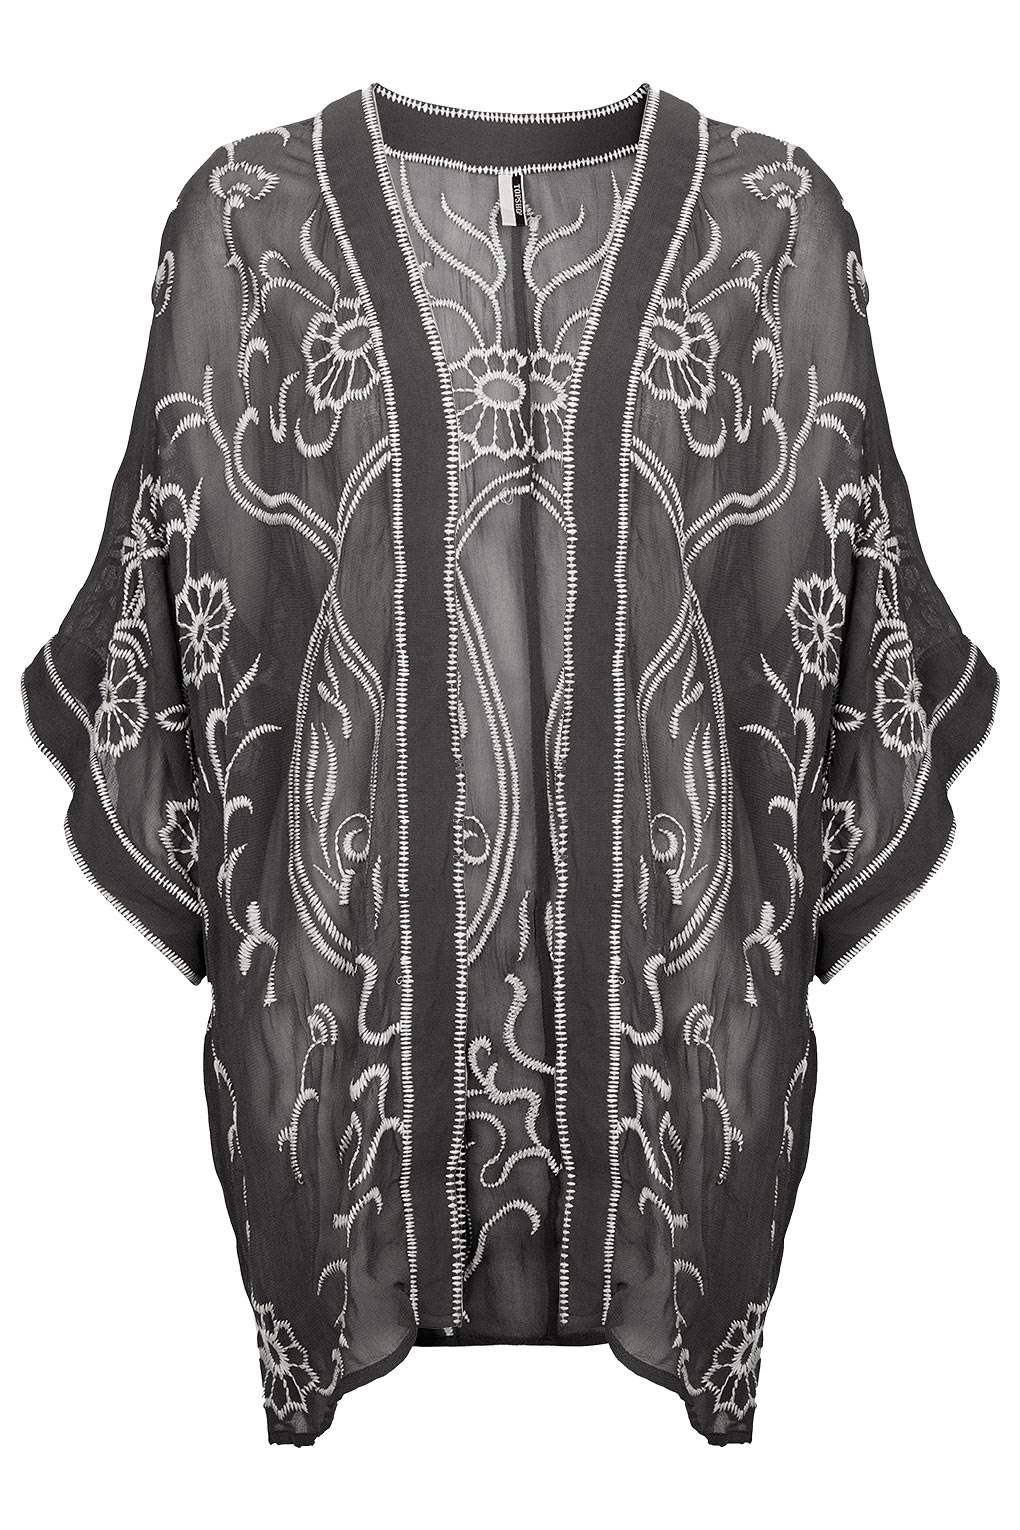 Lyst - Topshop Grey Embroidered Kimono in Gray